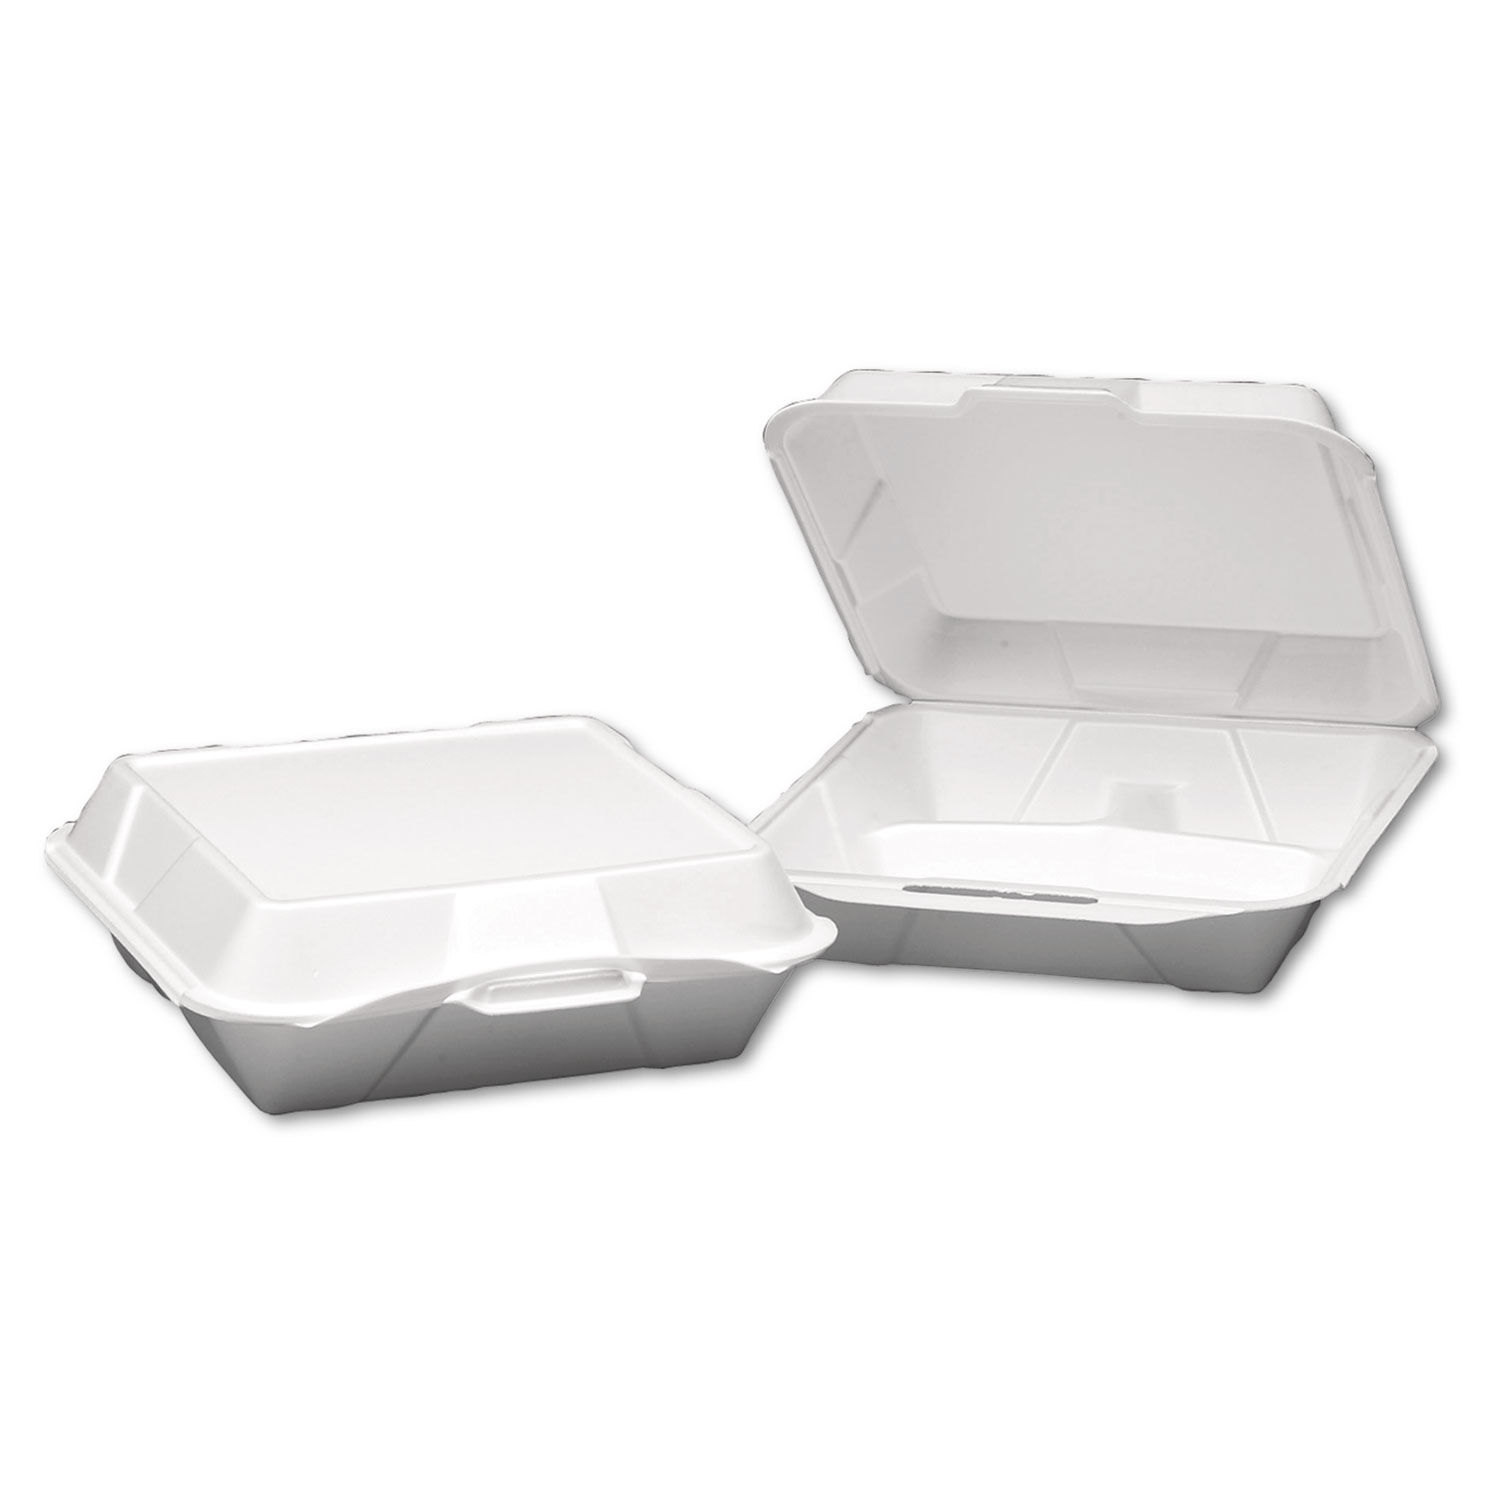 3-Compartment Foam Containers with Hinged Lids, 10-ct. Packs